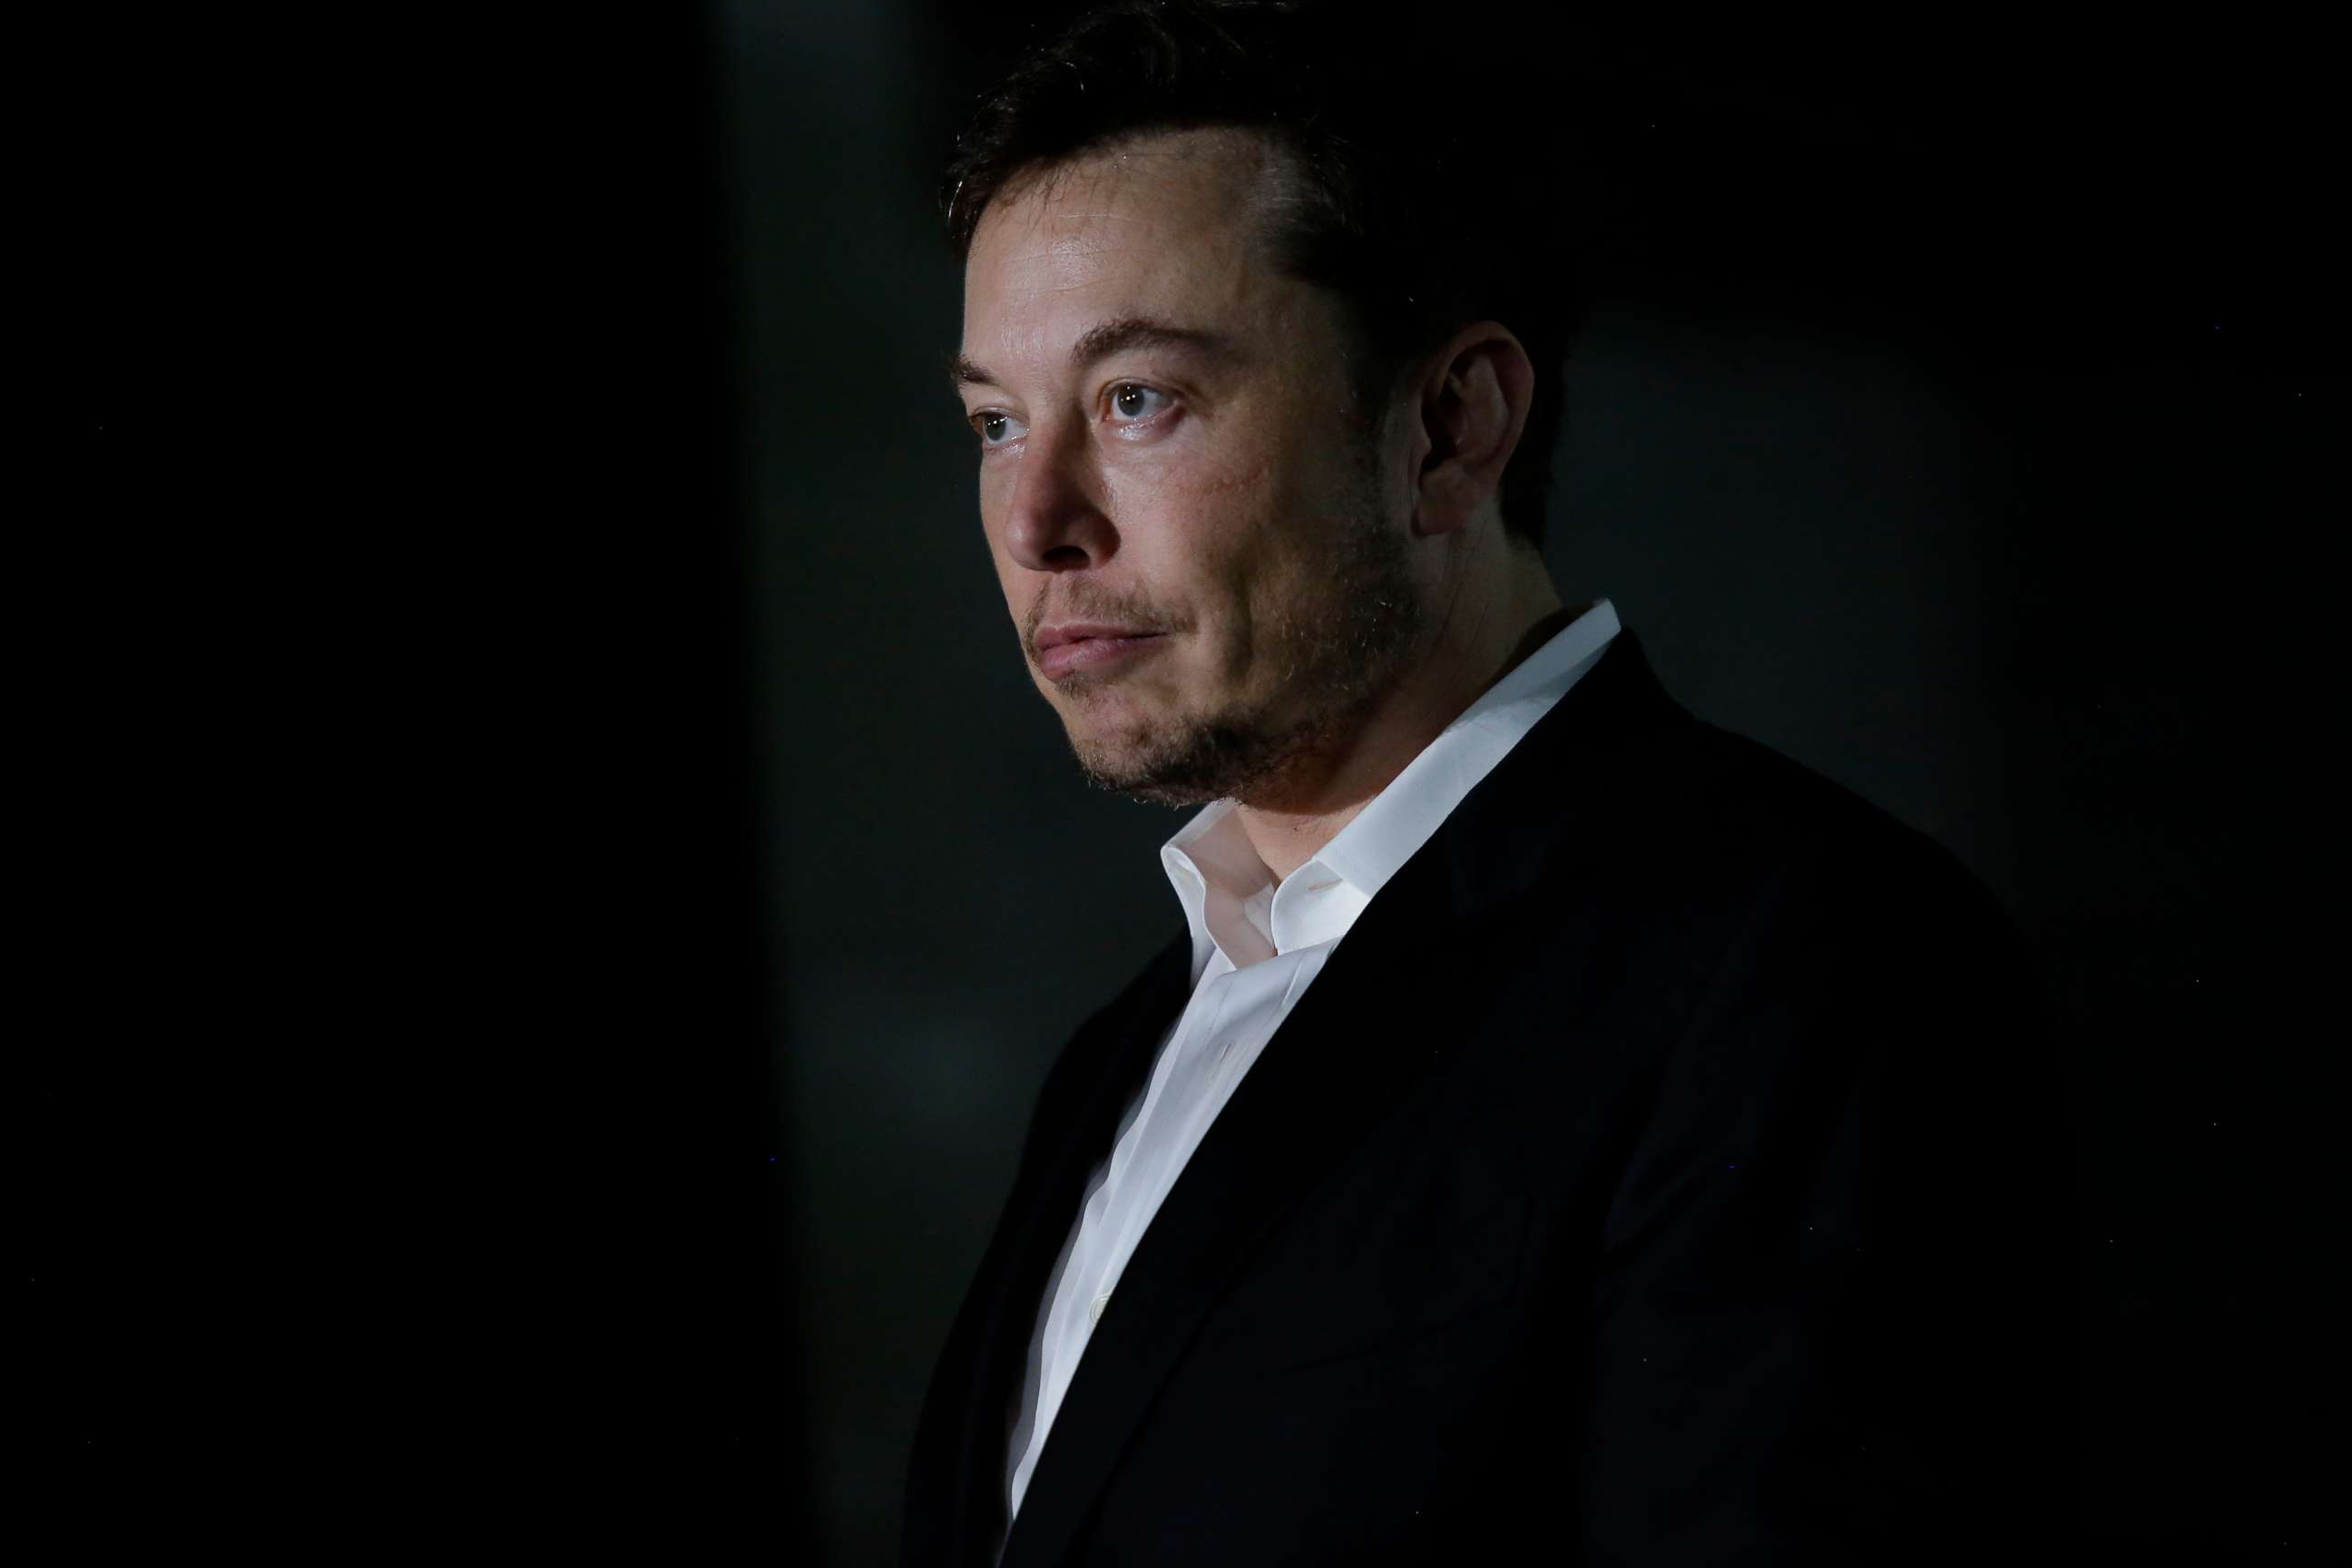 PHOTO: Tesla's Elon Musk has been accused of securities fraud by the Securities and Exchange Commission who have filed a lawsuit.